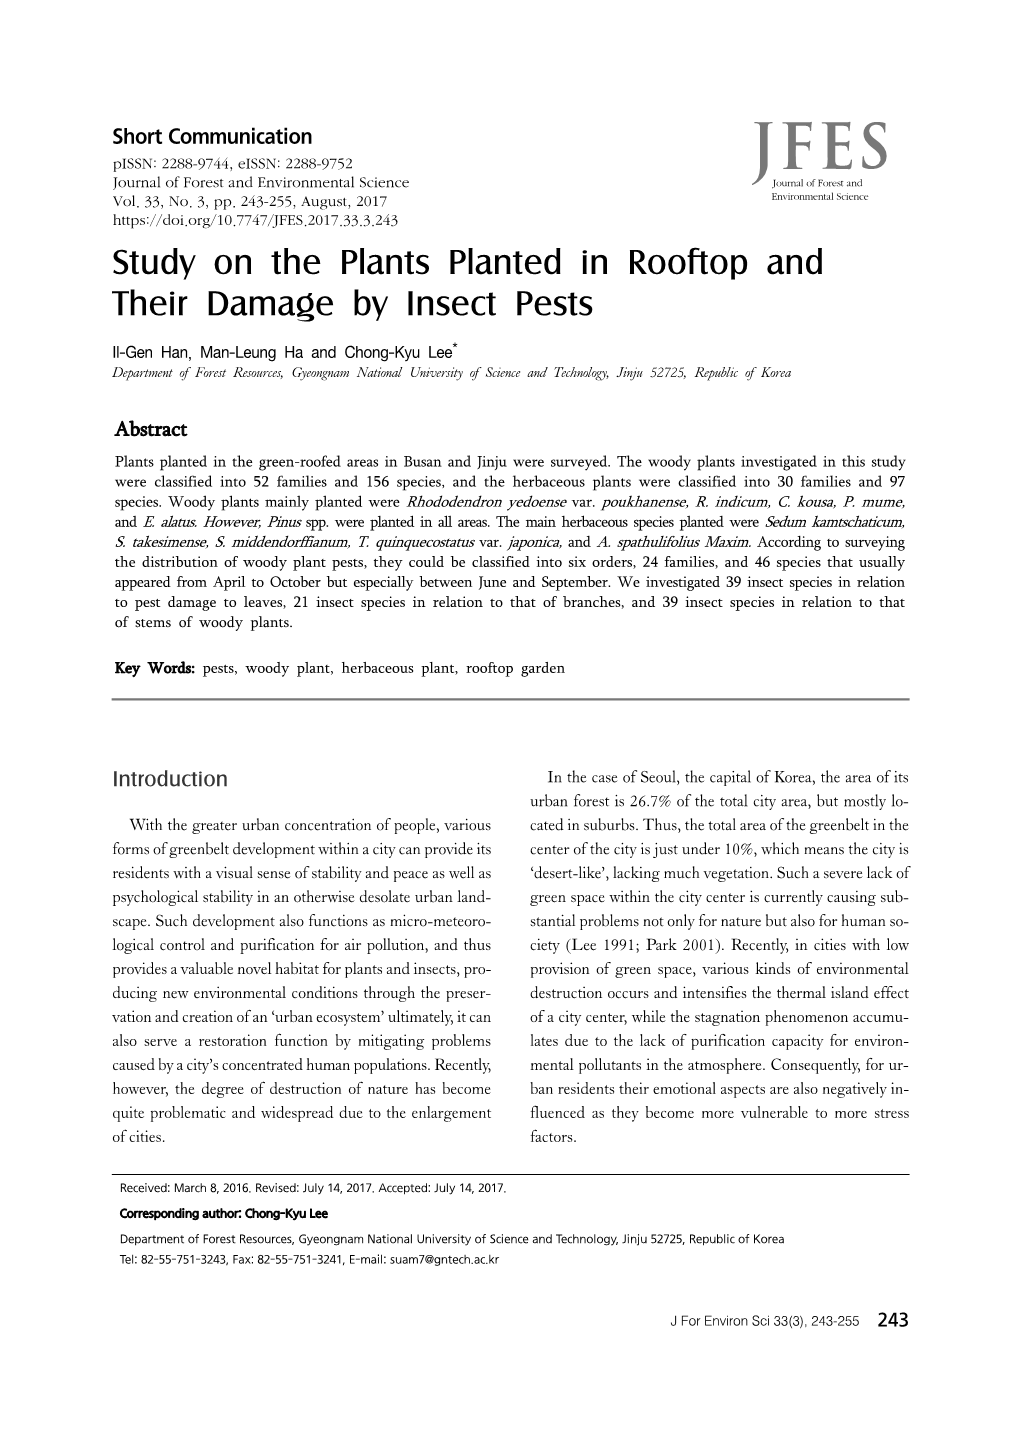 Study on the Plants Planted in Rooftop and Their Damage by Insect Pests